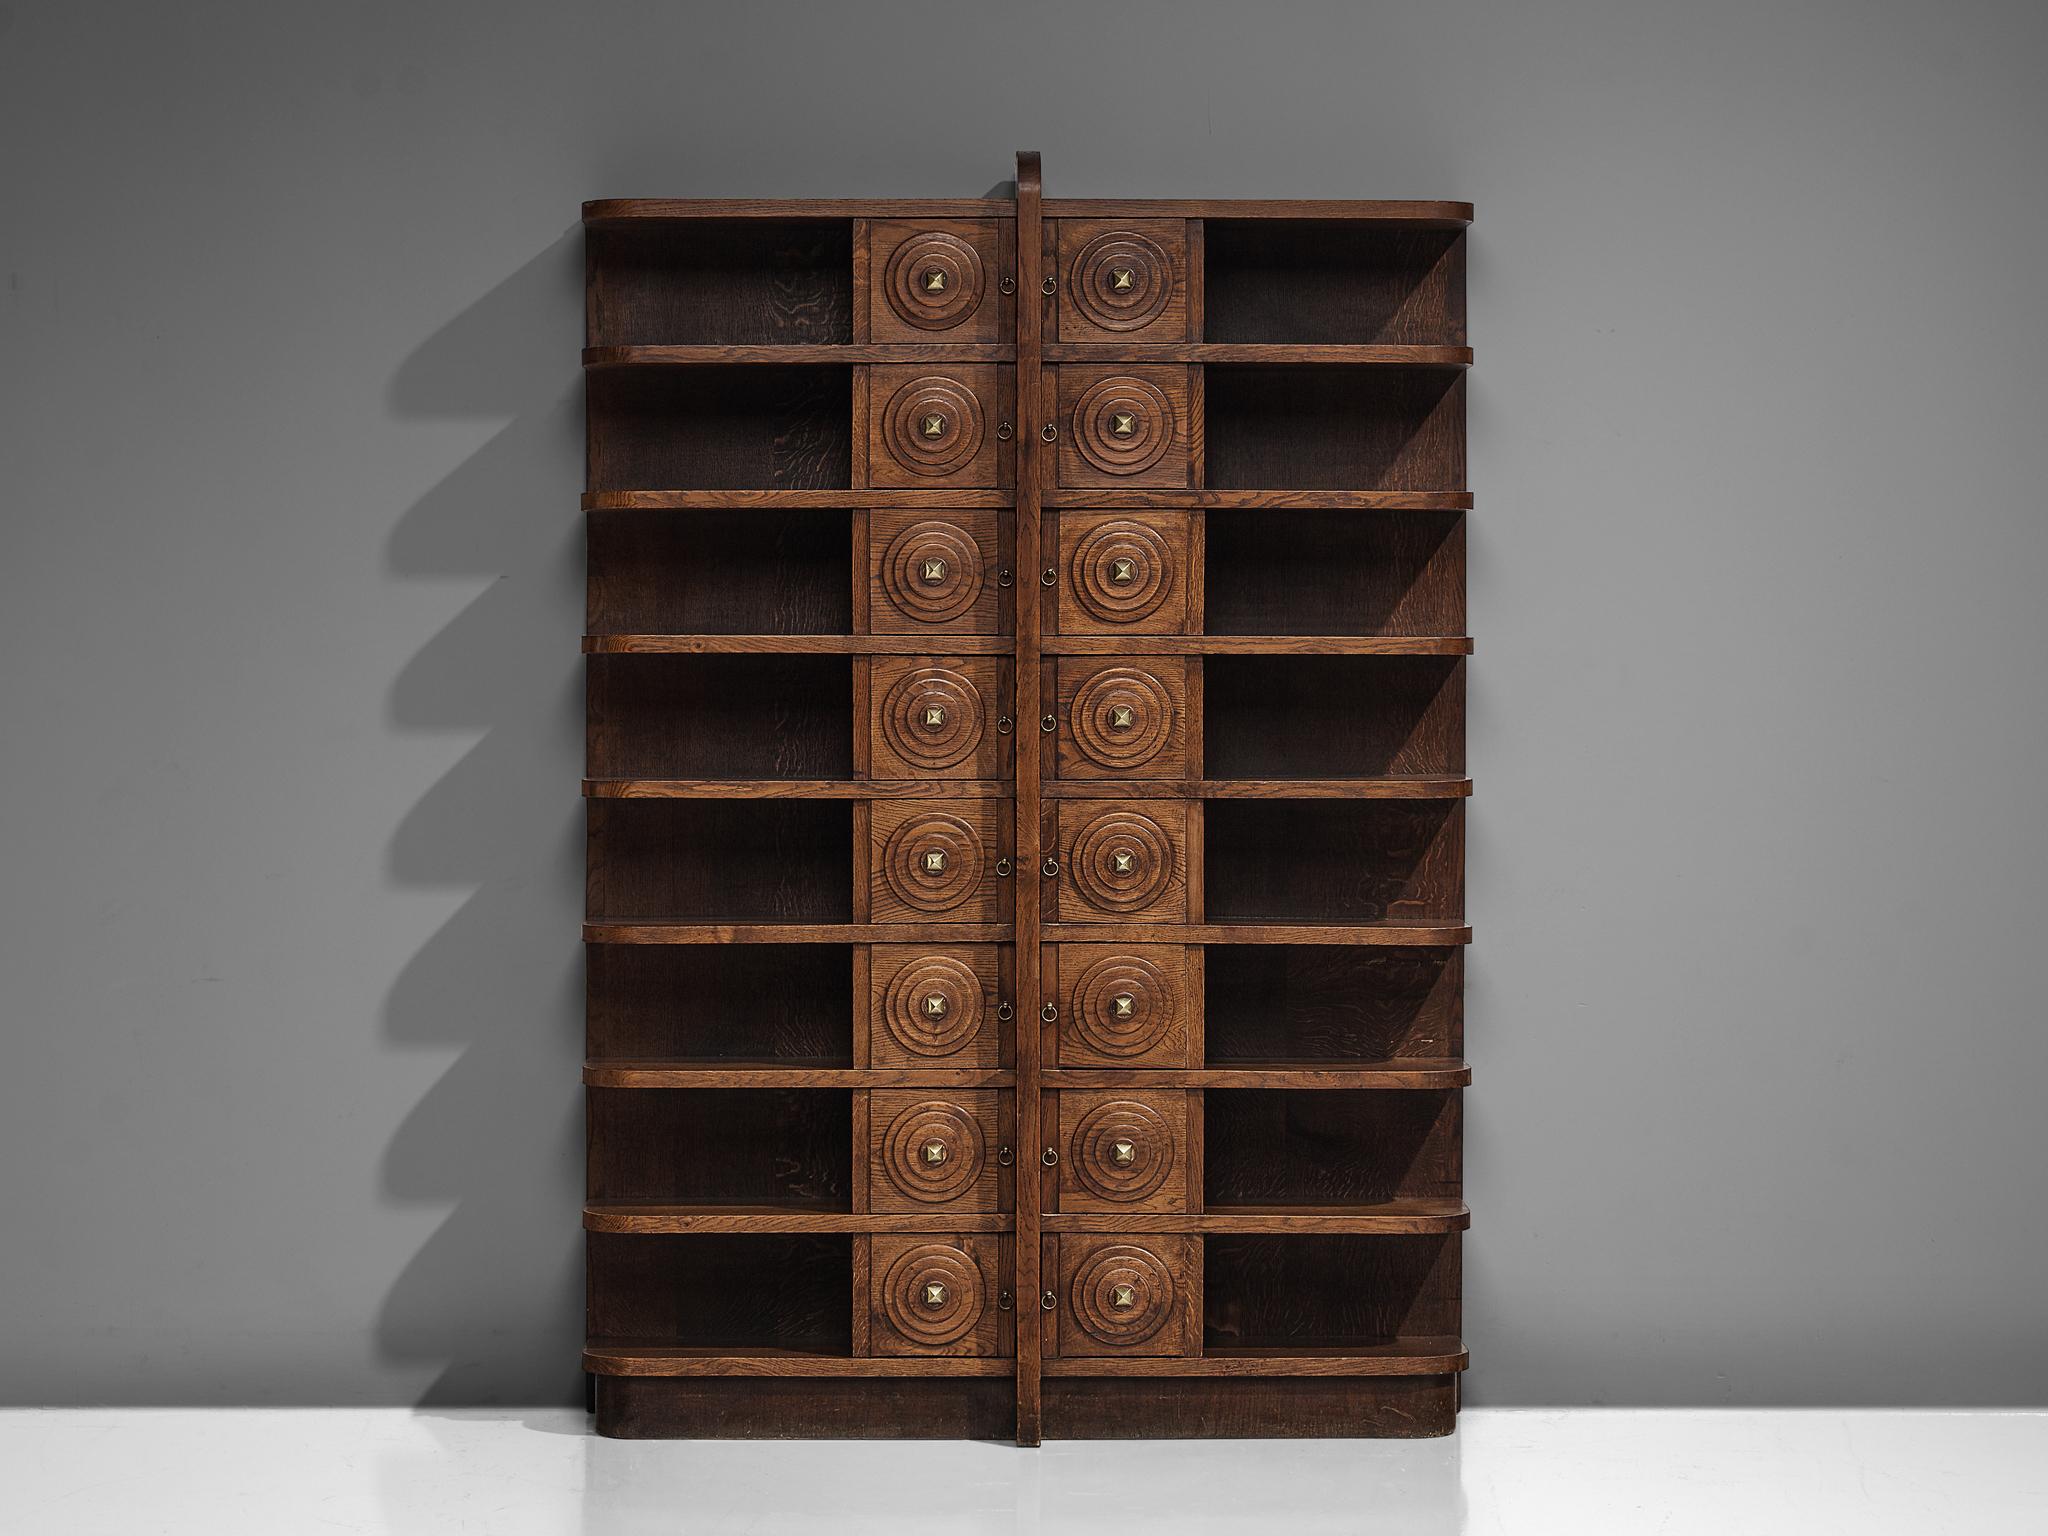 French Art Deco bookcase, patinated oak, brass, Europe, 1930s.

Large Art Deco bookcase in patinated oak in a symmetrical design. The bookcase has eight shelves left and right. The shelves have beautifully rounded edges, which give the bookcase a